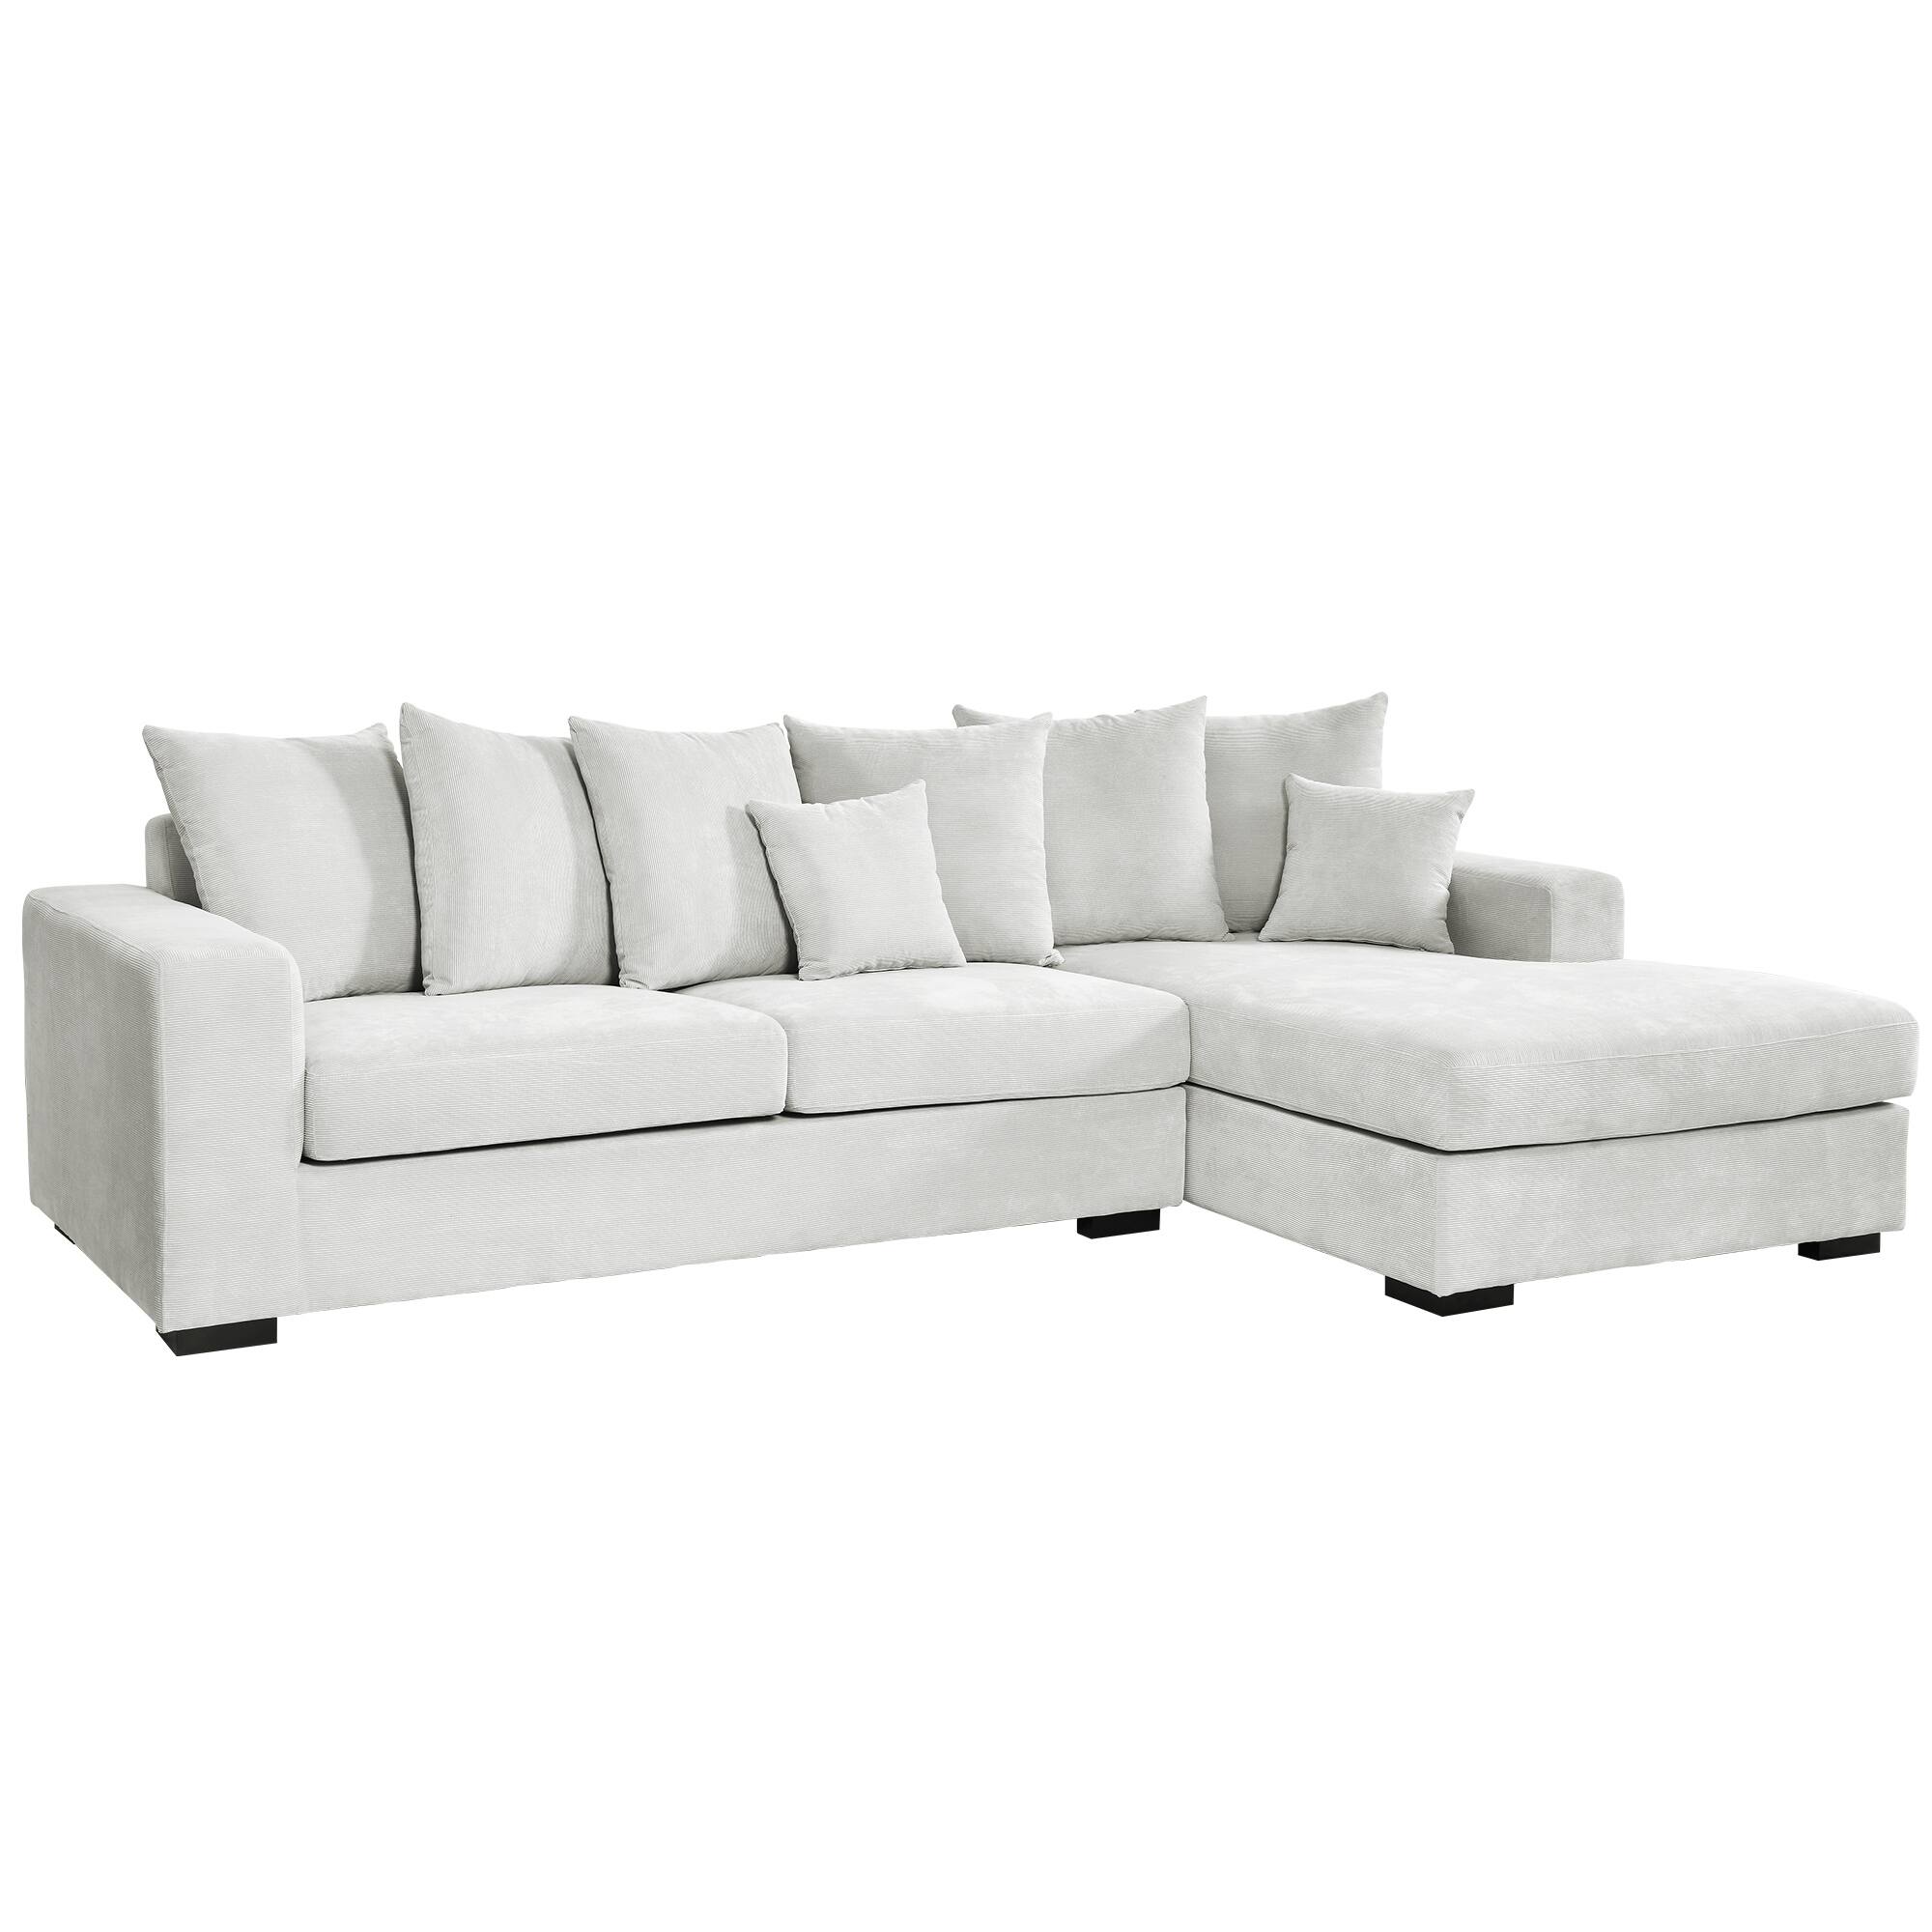 Modern Upholstered Corduroy L-Shape Sectional Sofa with 8 Pillows